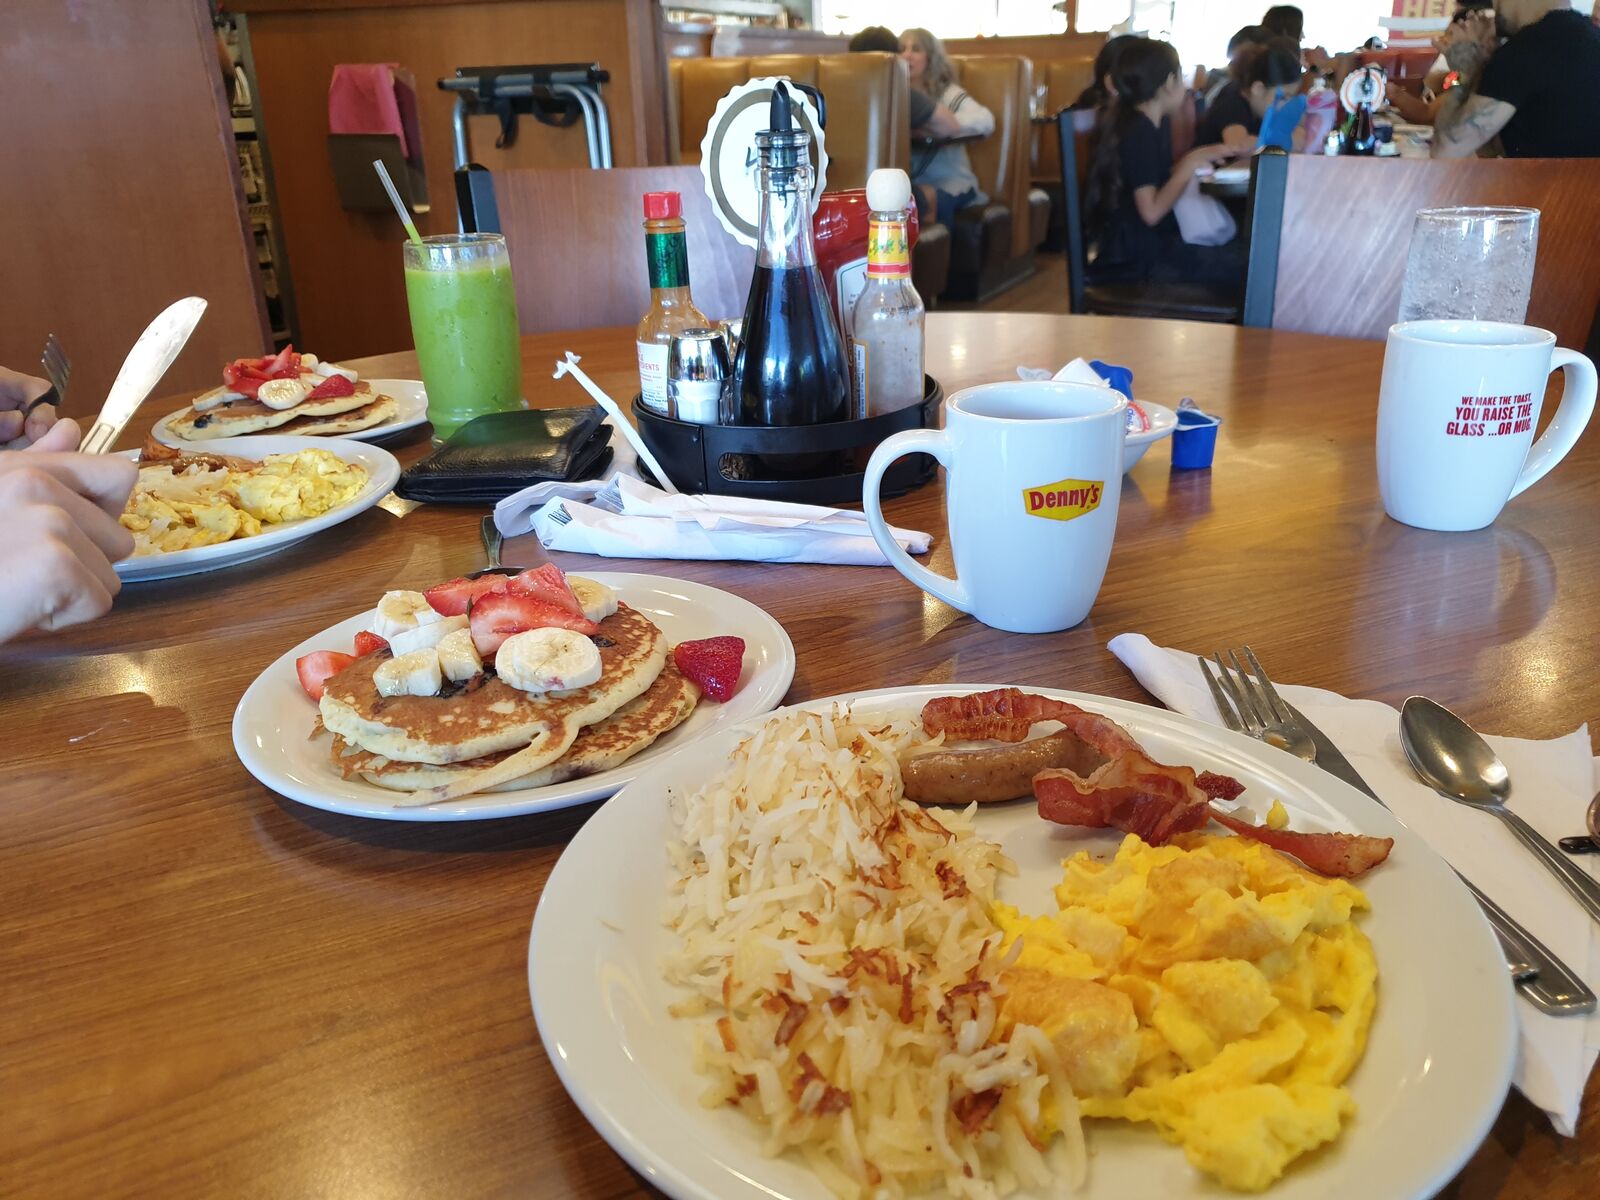 Breakfast at Denny’s american diner with enough calories for an entire day